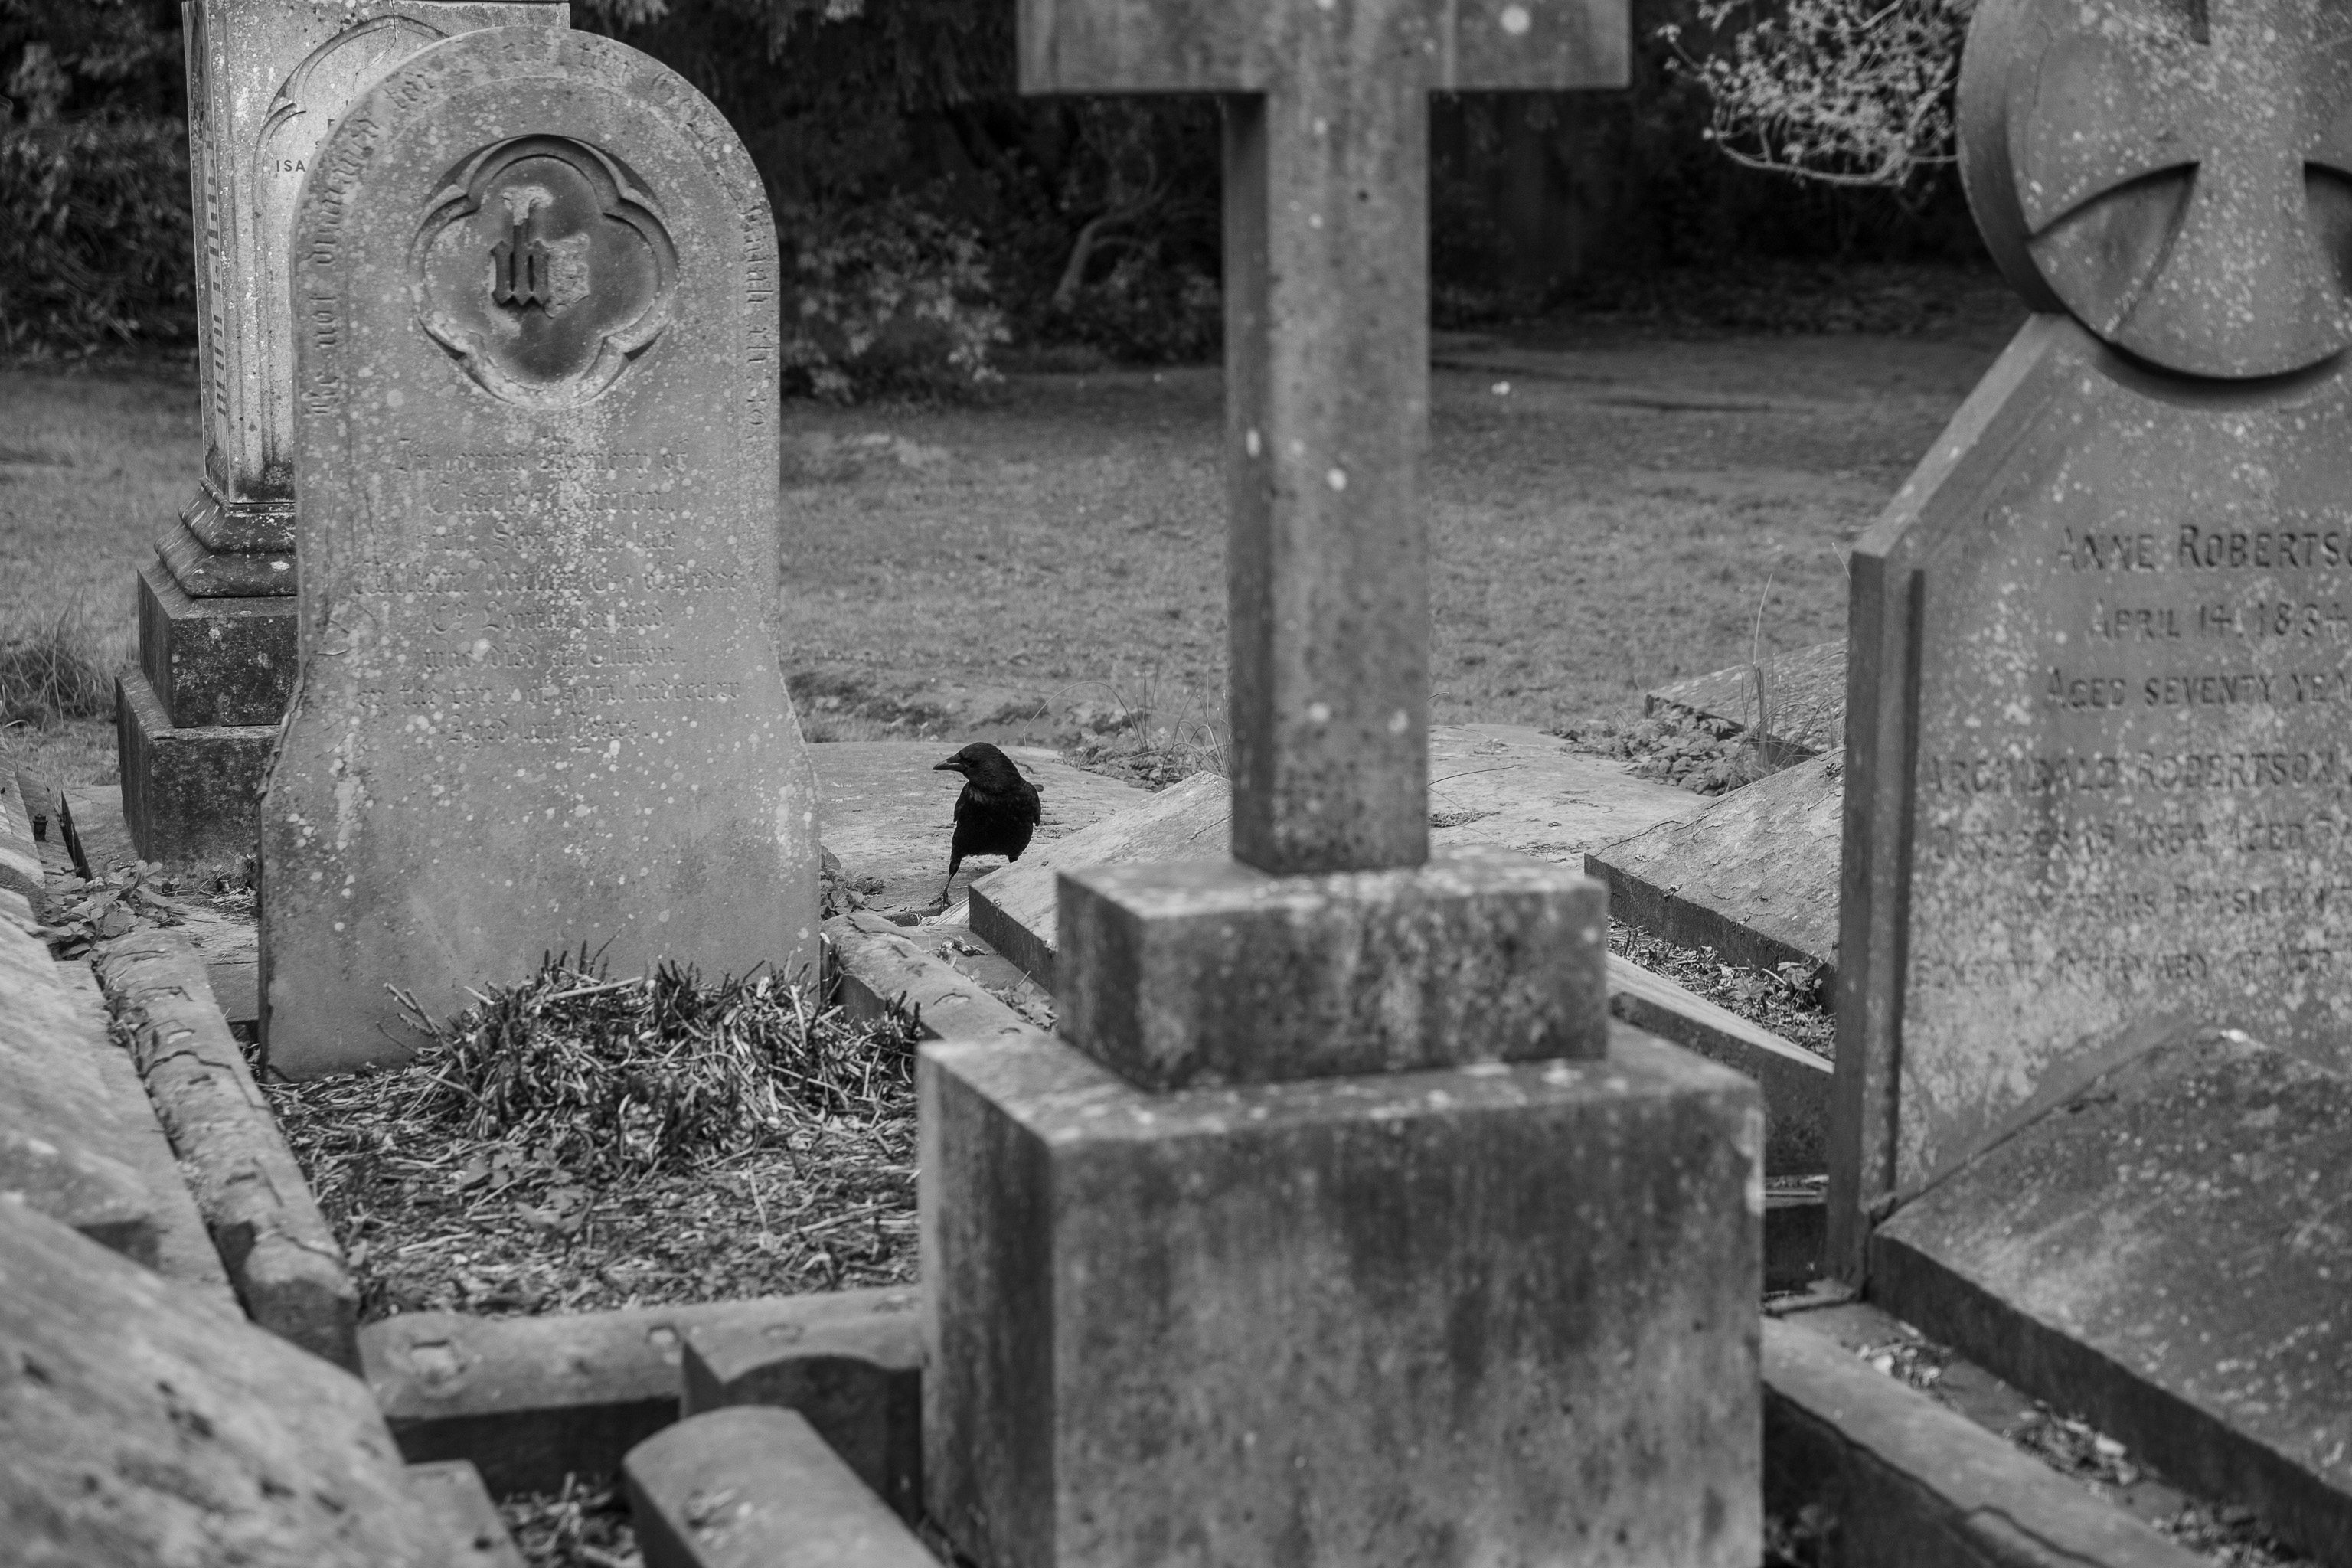 Corvid
And the local crows add a lot of good graveyard atmosphere with their cawing.
